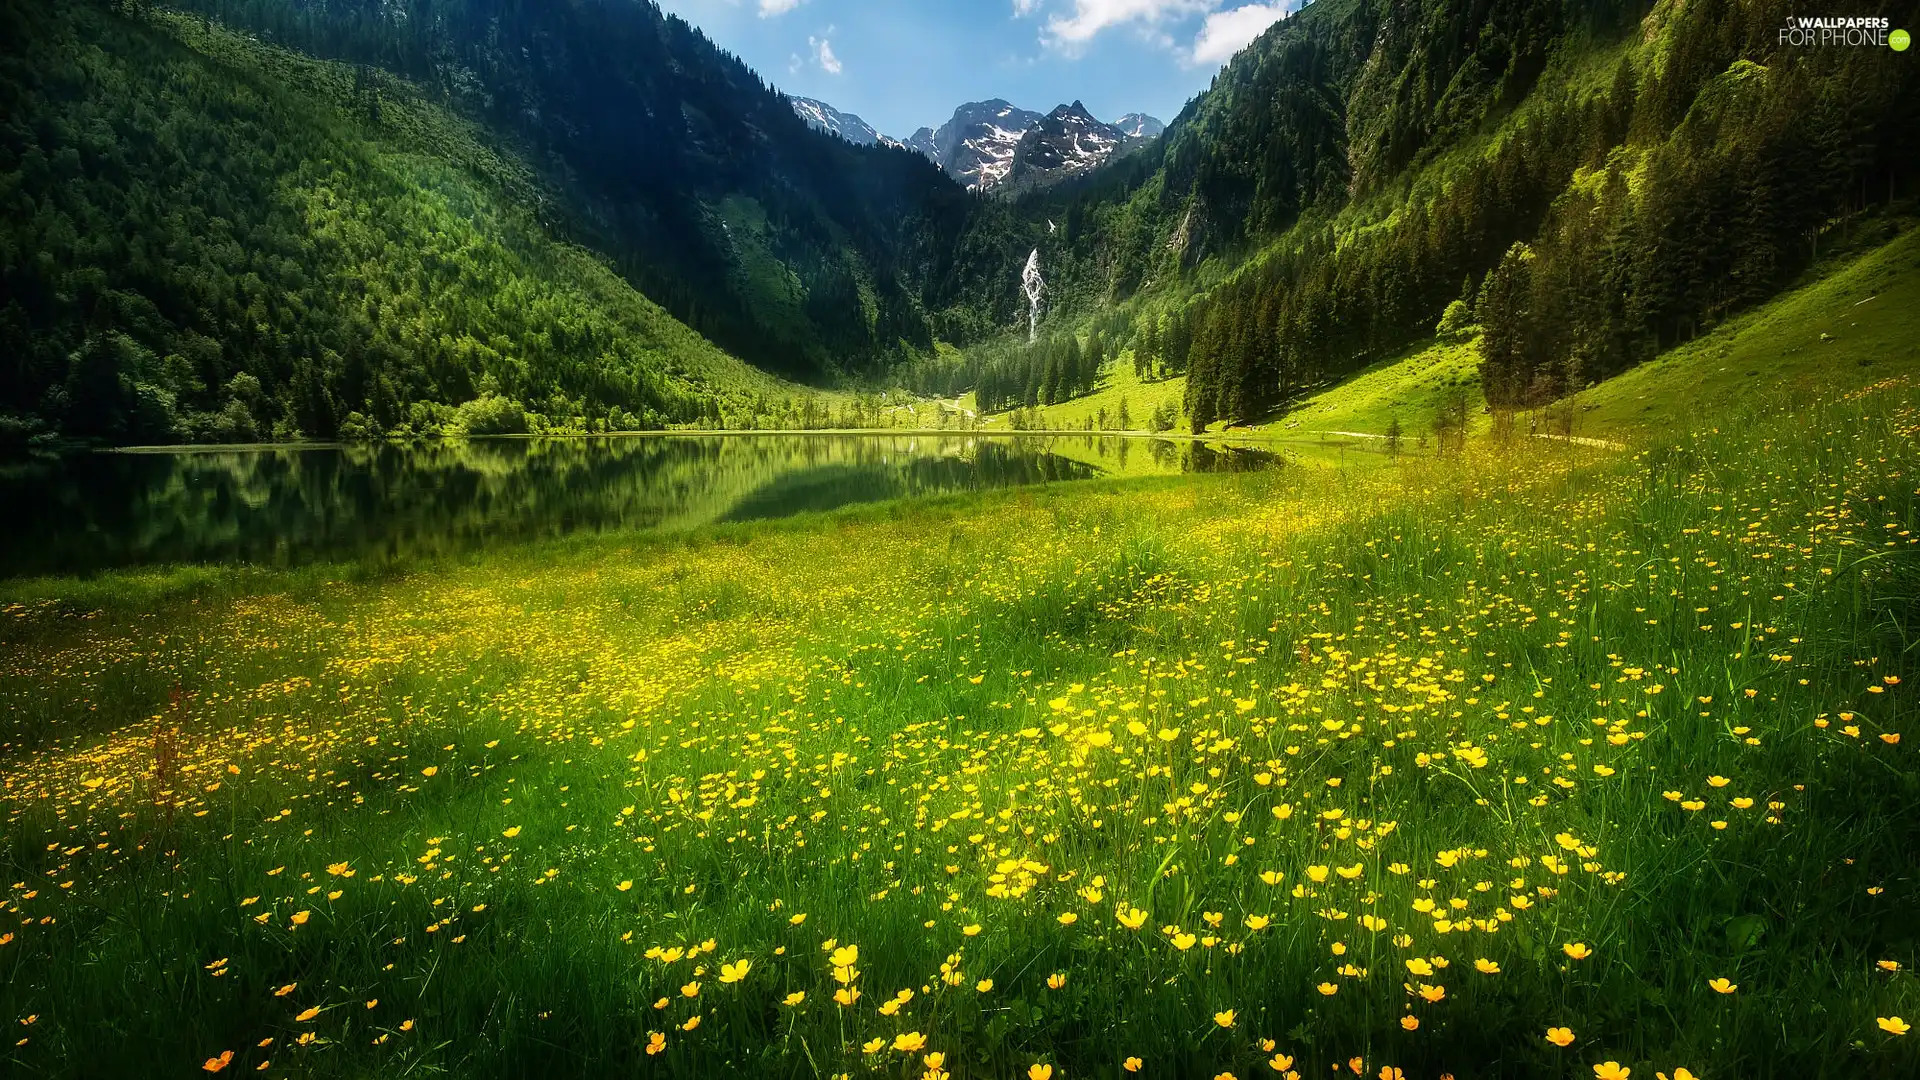 Meadow, Flowers, Mountains, waterfall, lake - For phone wallpapers ...